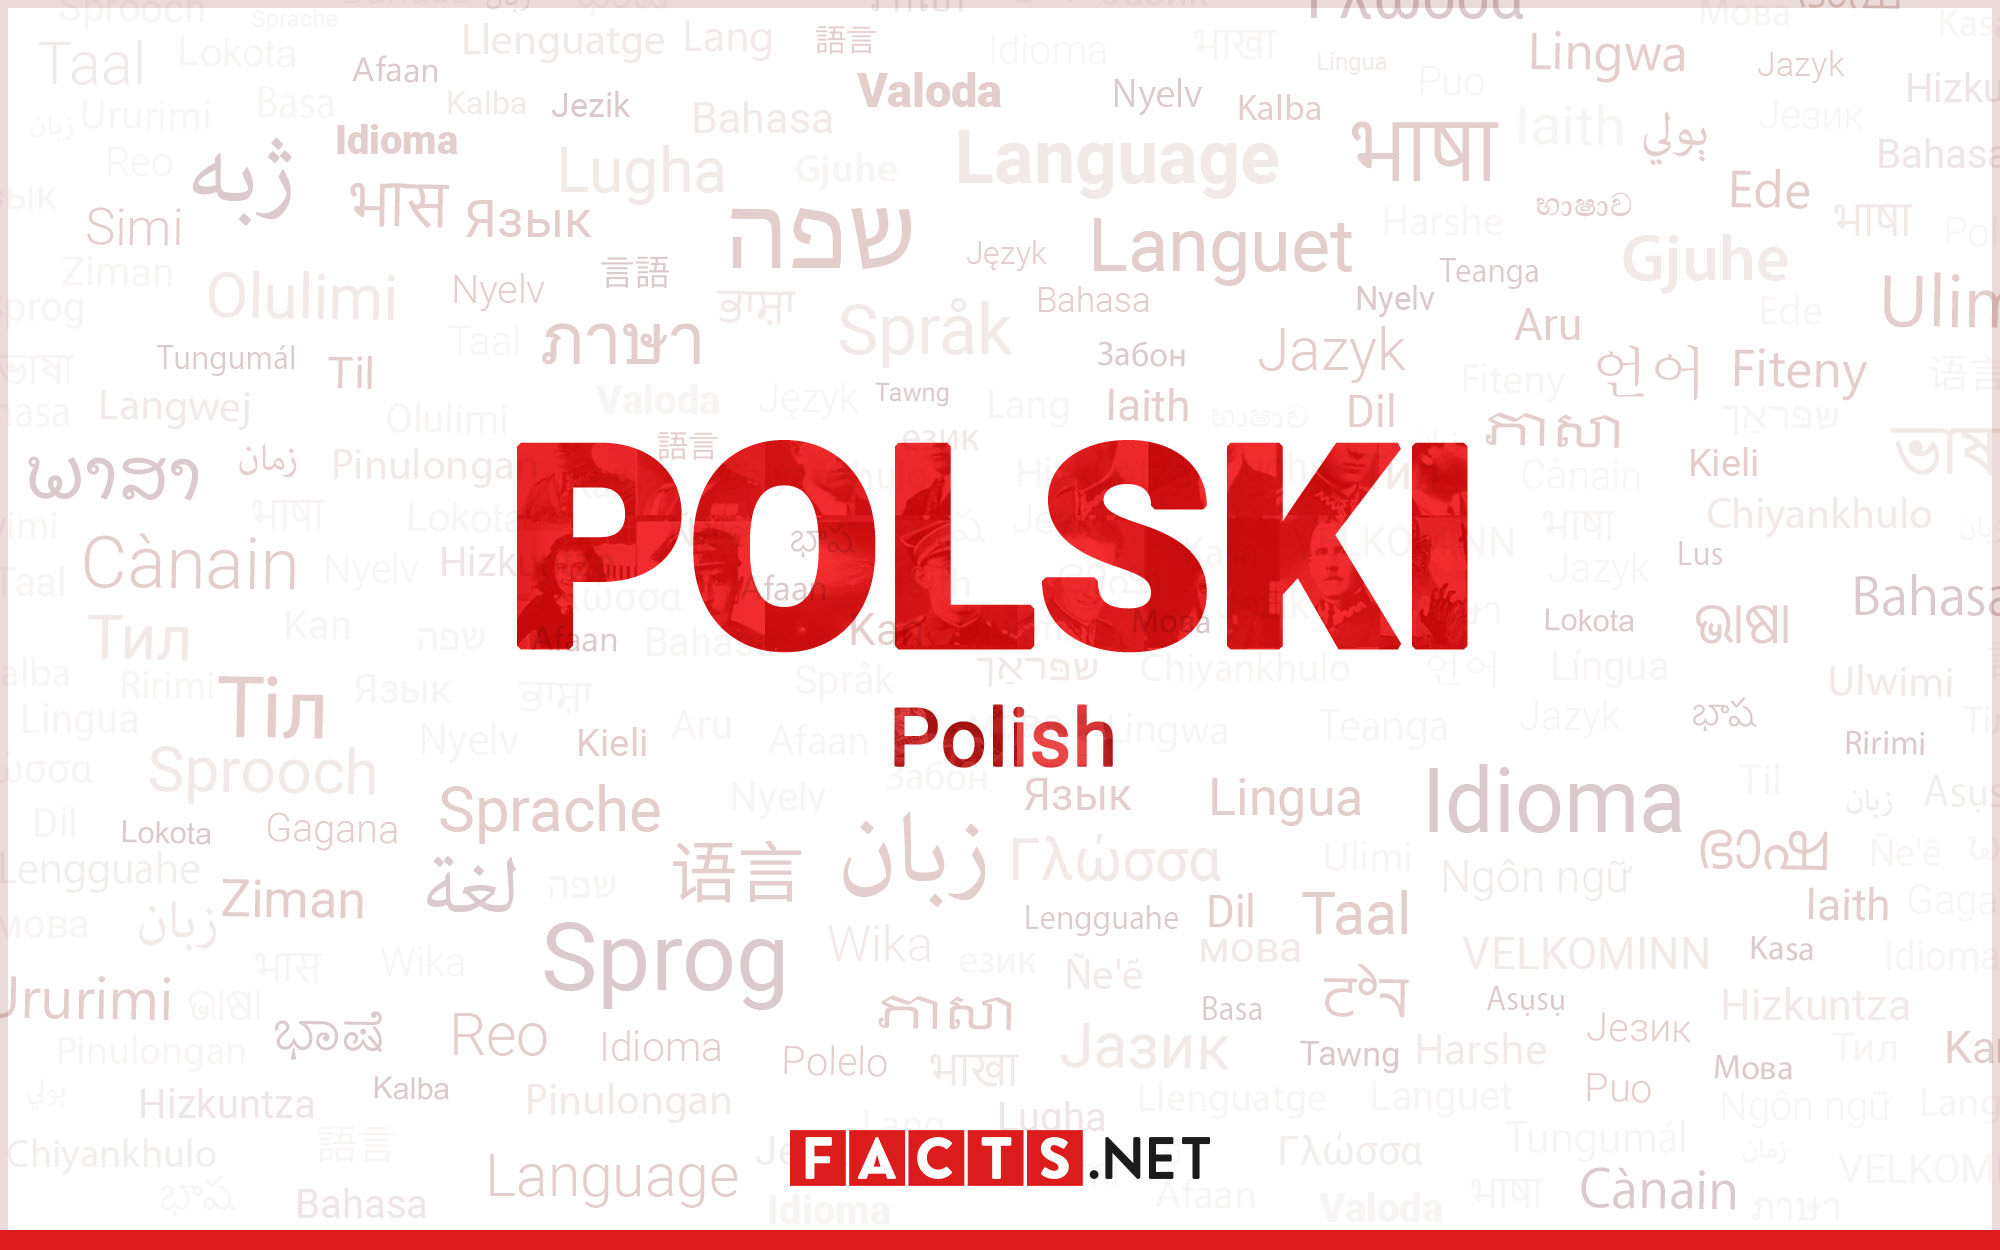 11 Key Facts about the Polish Language, Article